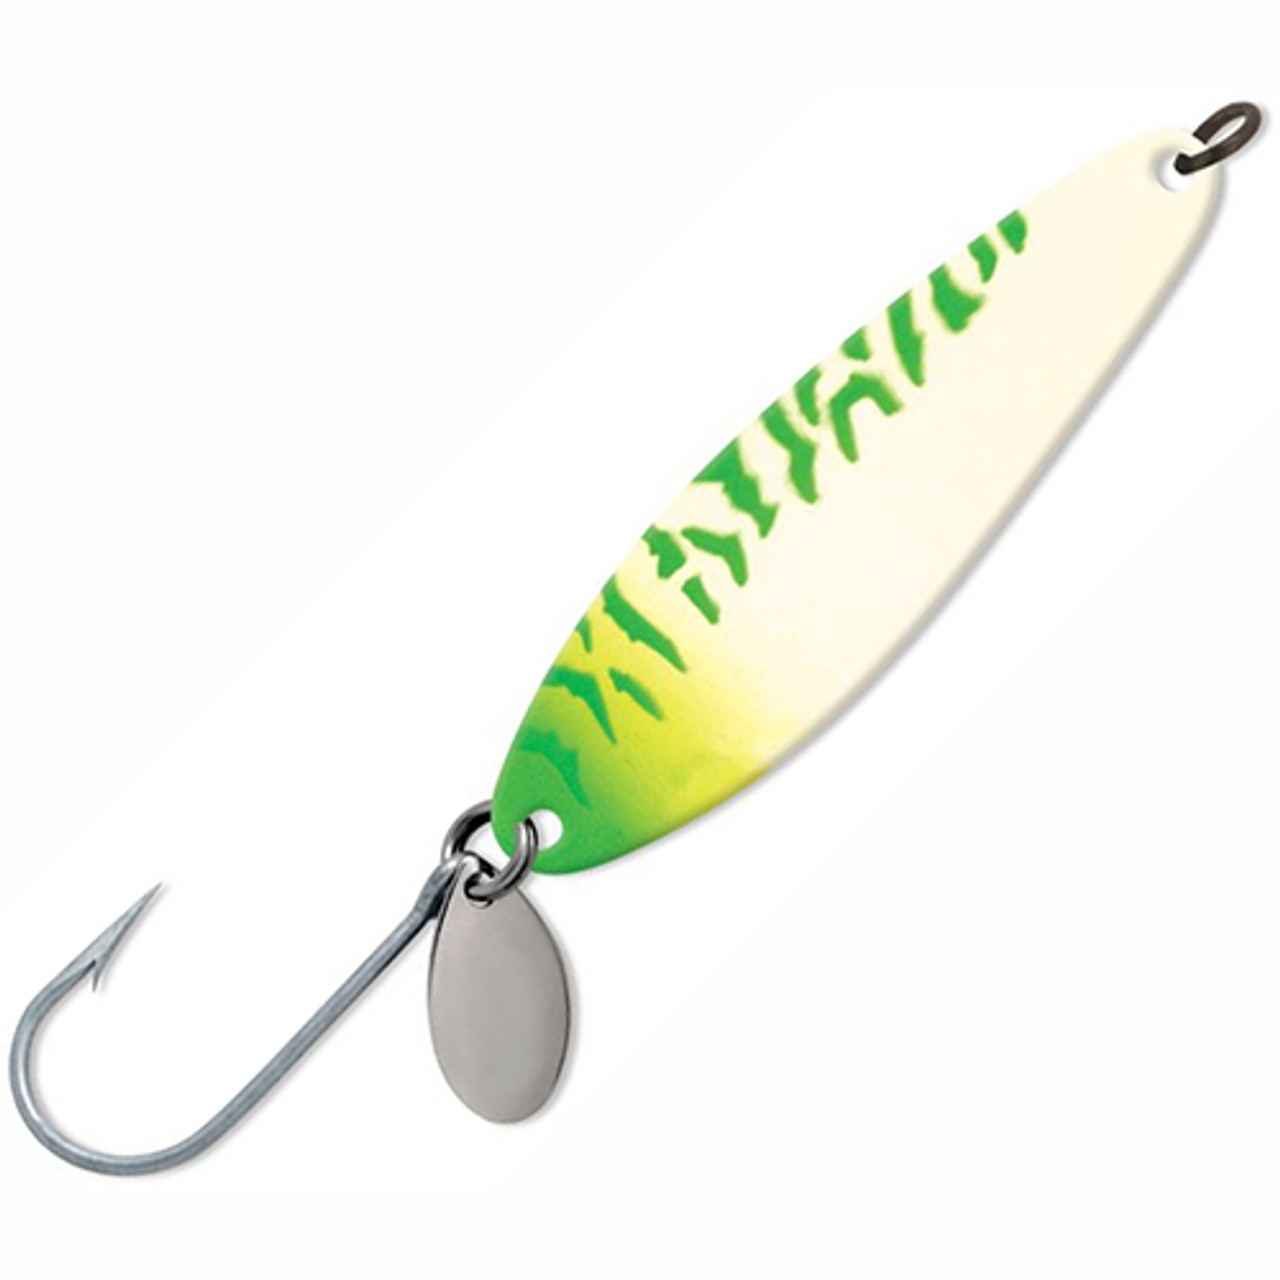 Luhr Jensen Coyote Spoon - Green Tiger - The Harbour Chandler